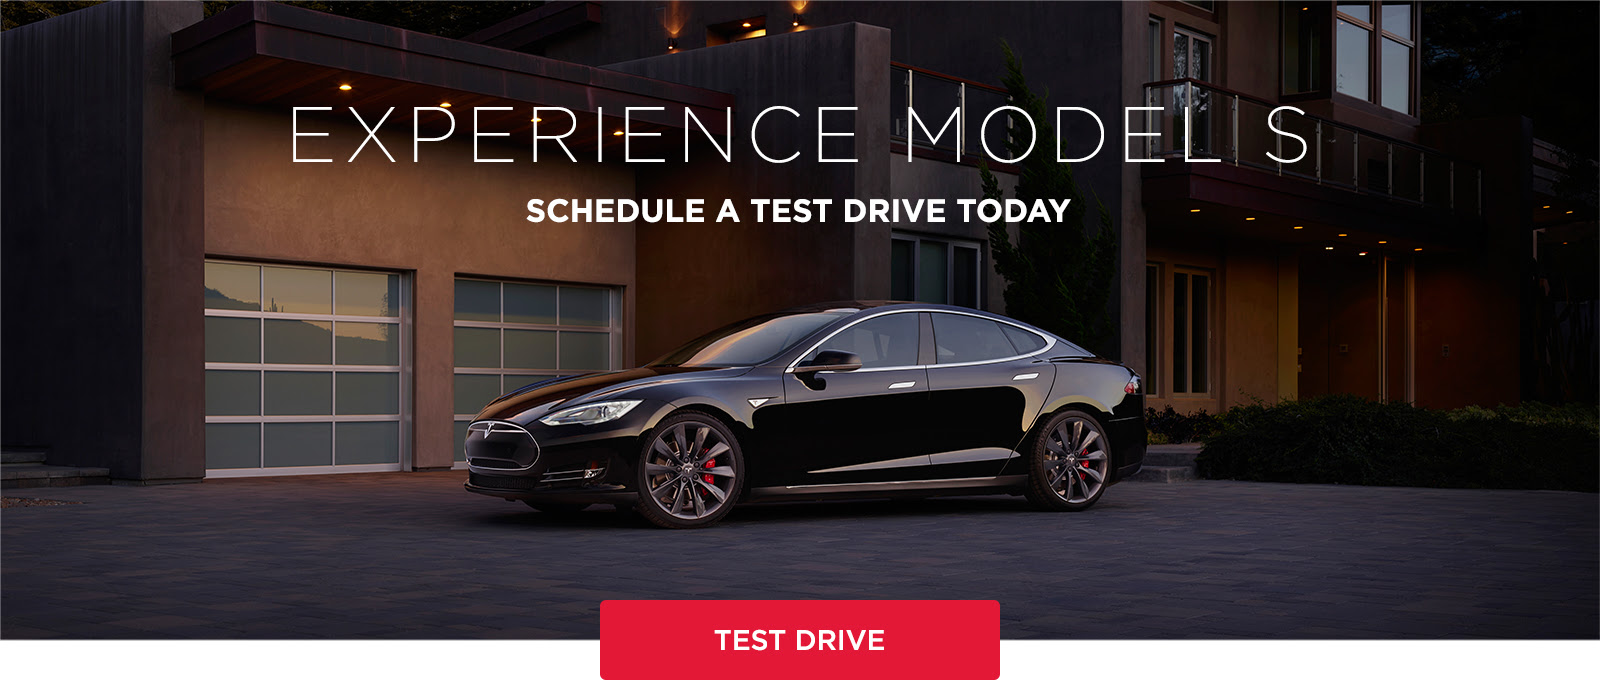 Experience Model S. Schedule a Test Drive Today.